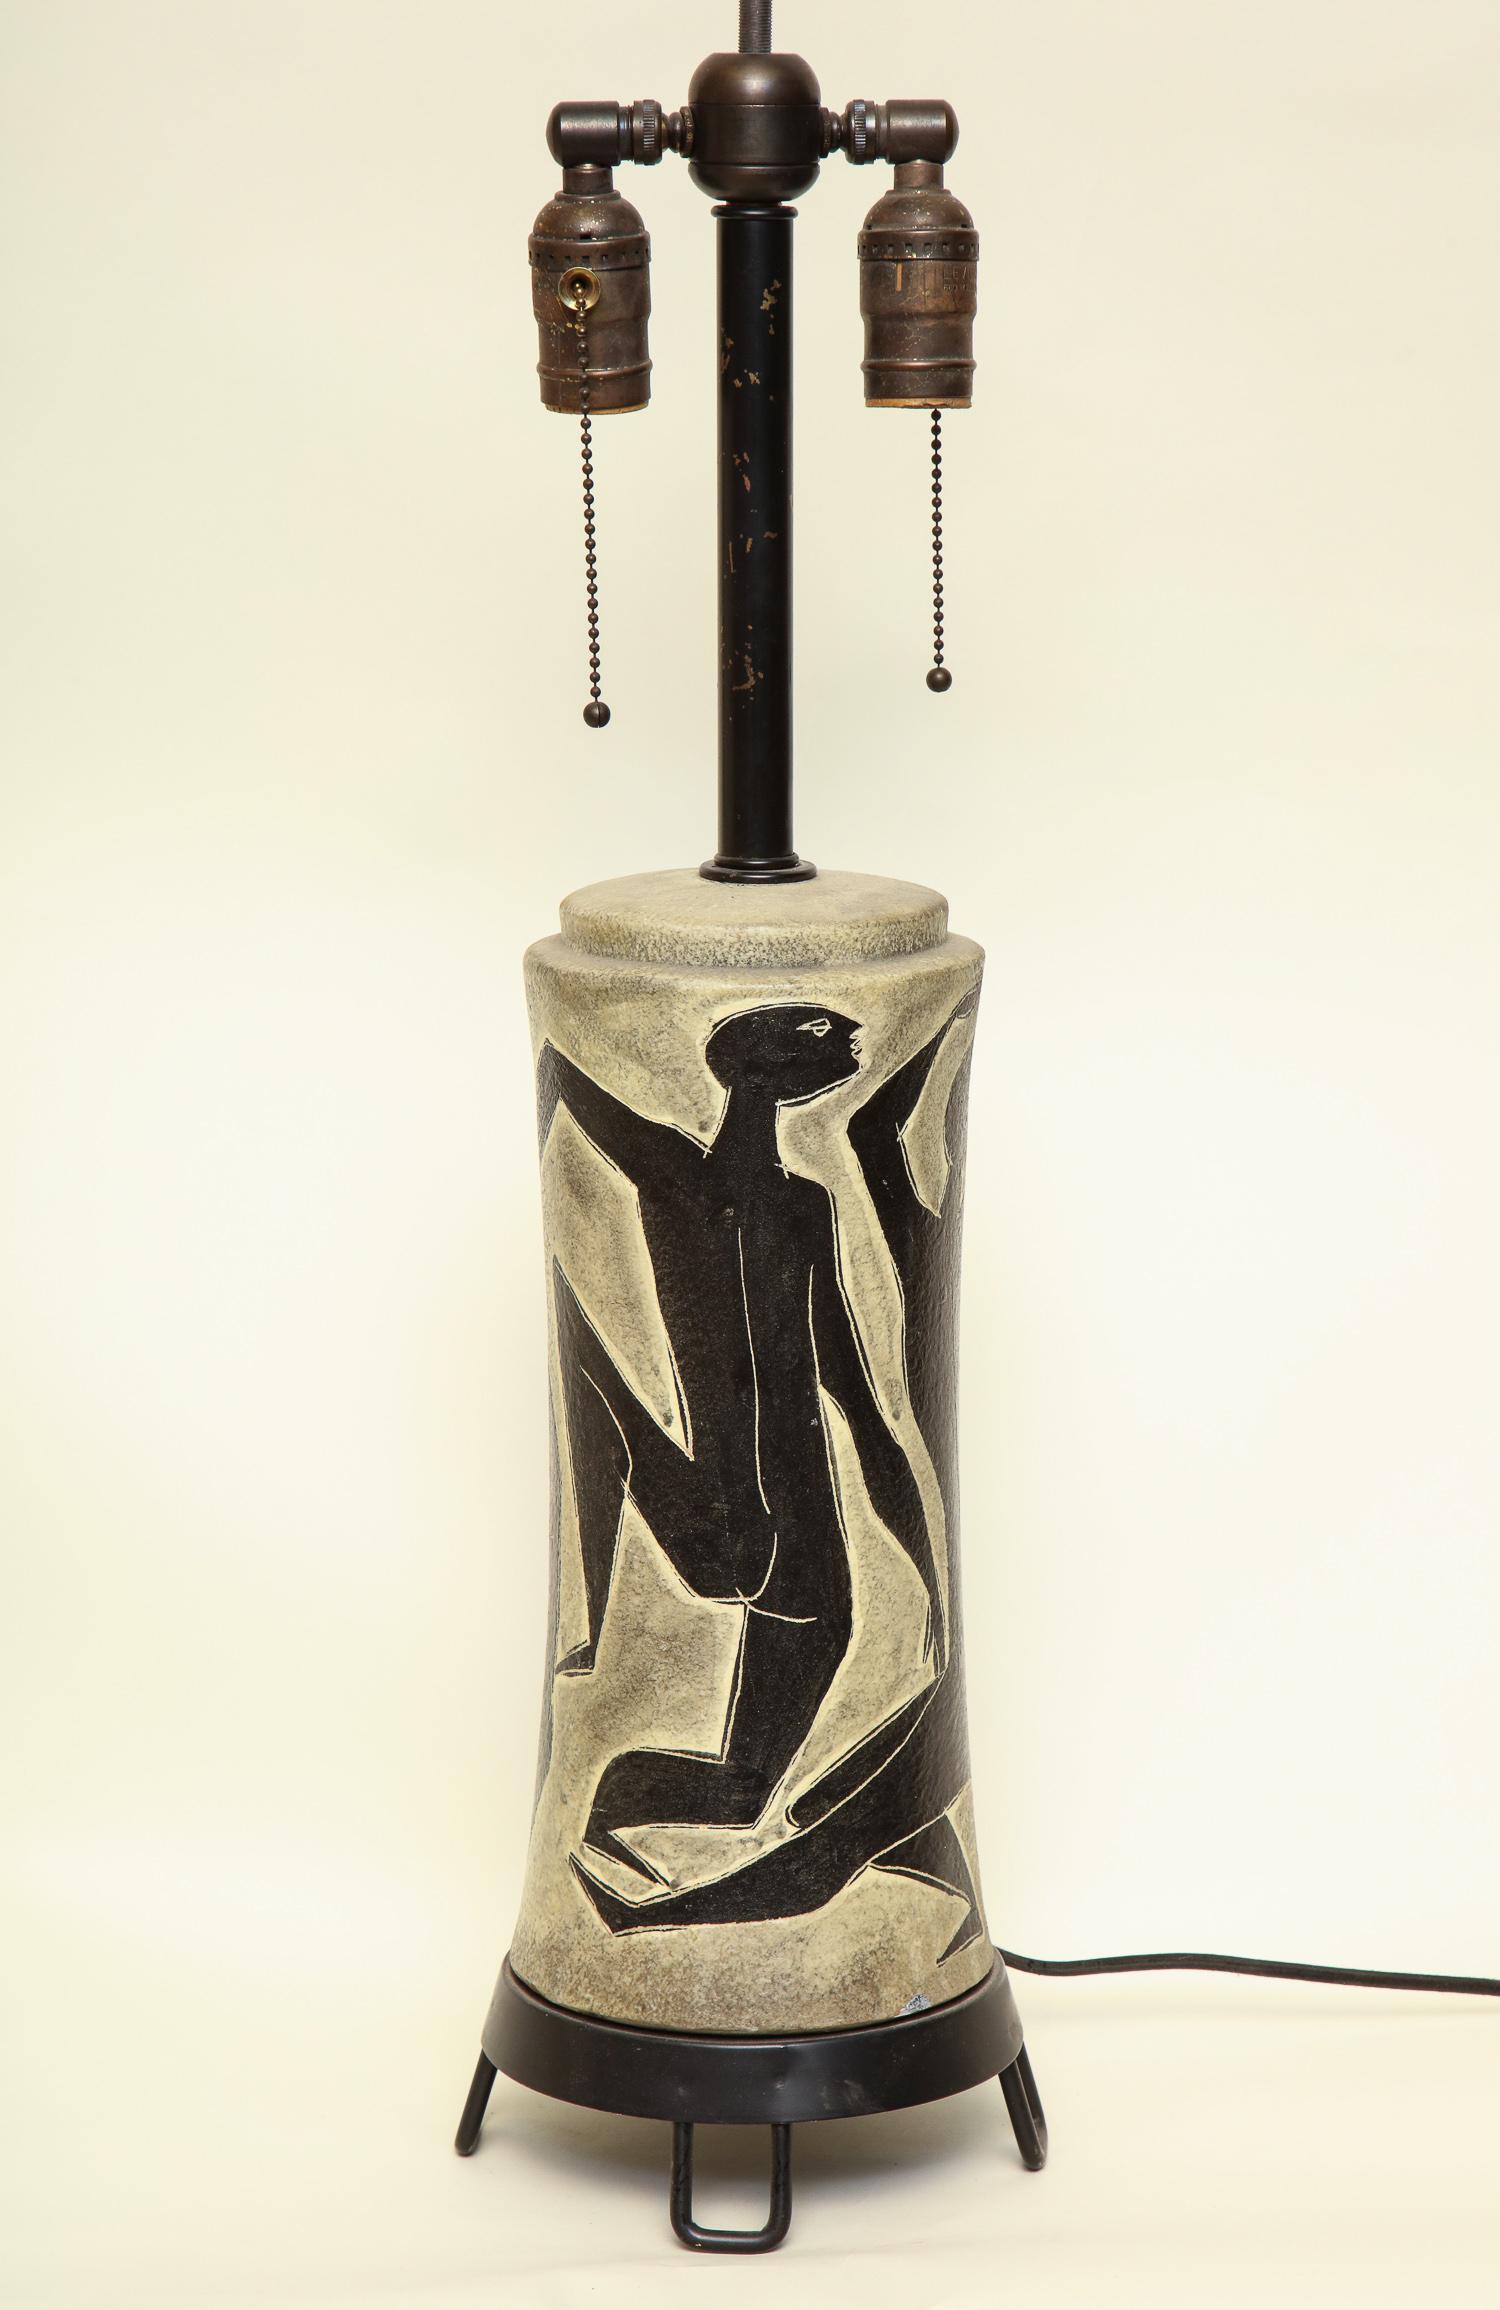 Glazed Fantoni Table Lamp Ceramic with Incised Stylized Men, Mid-Century Modern, 1950s For Sale